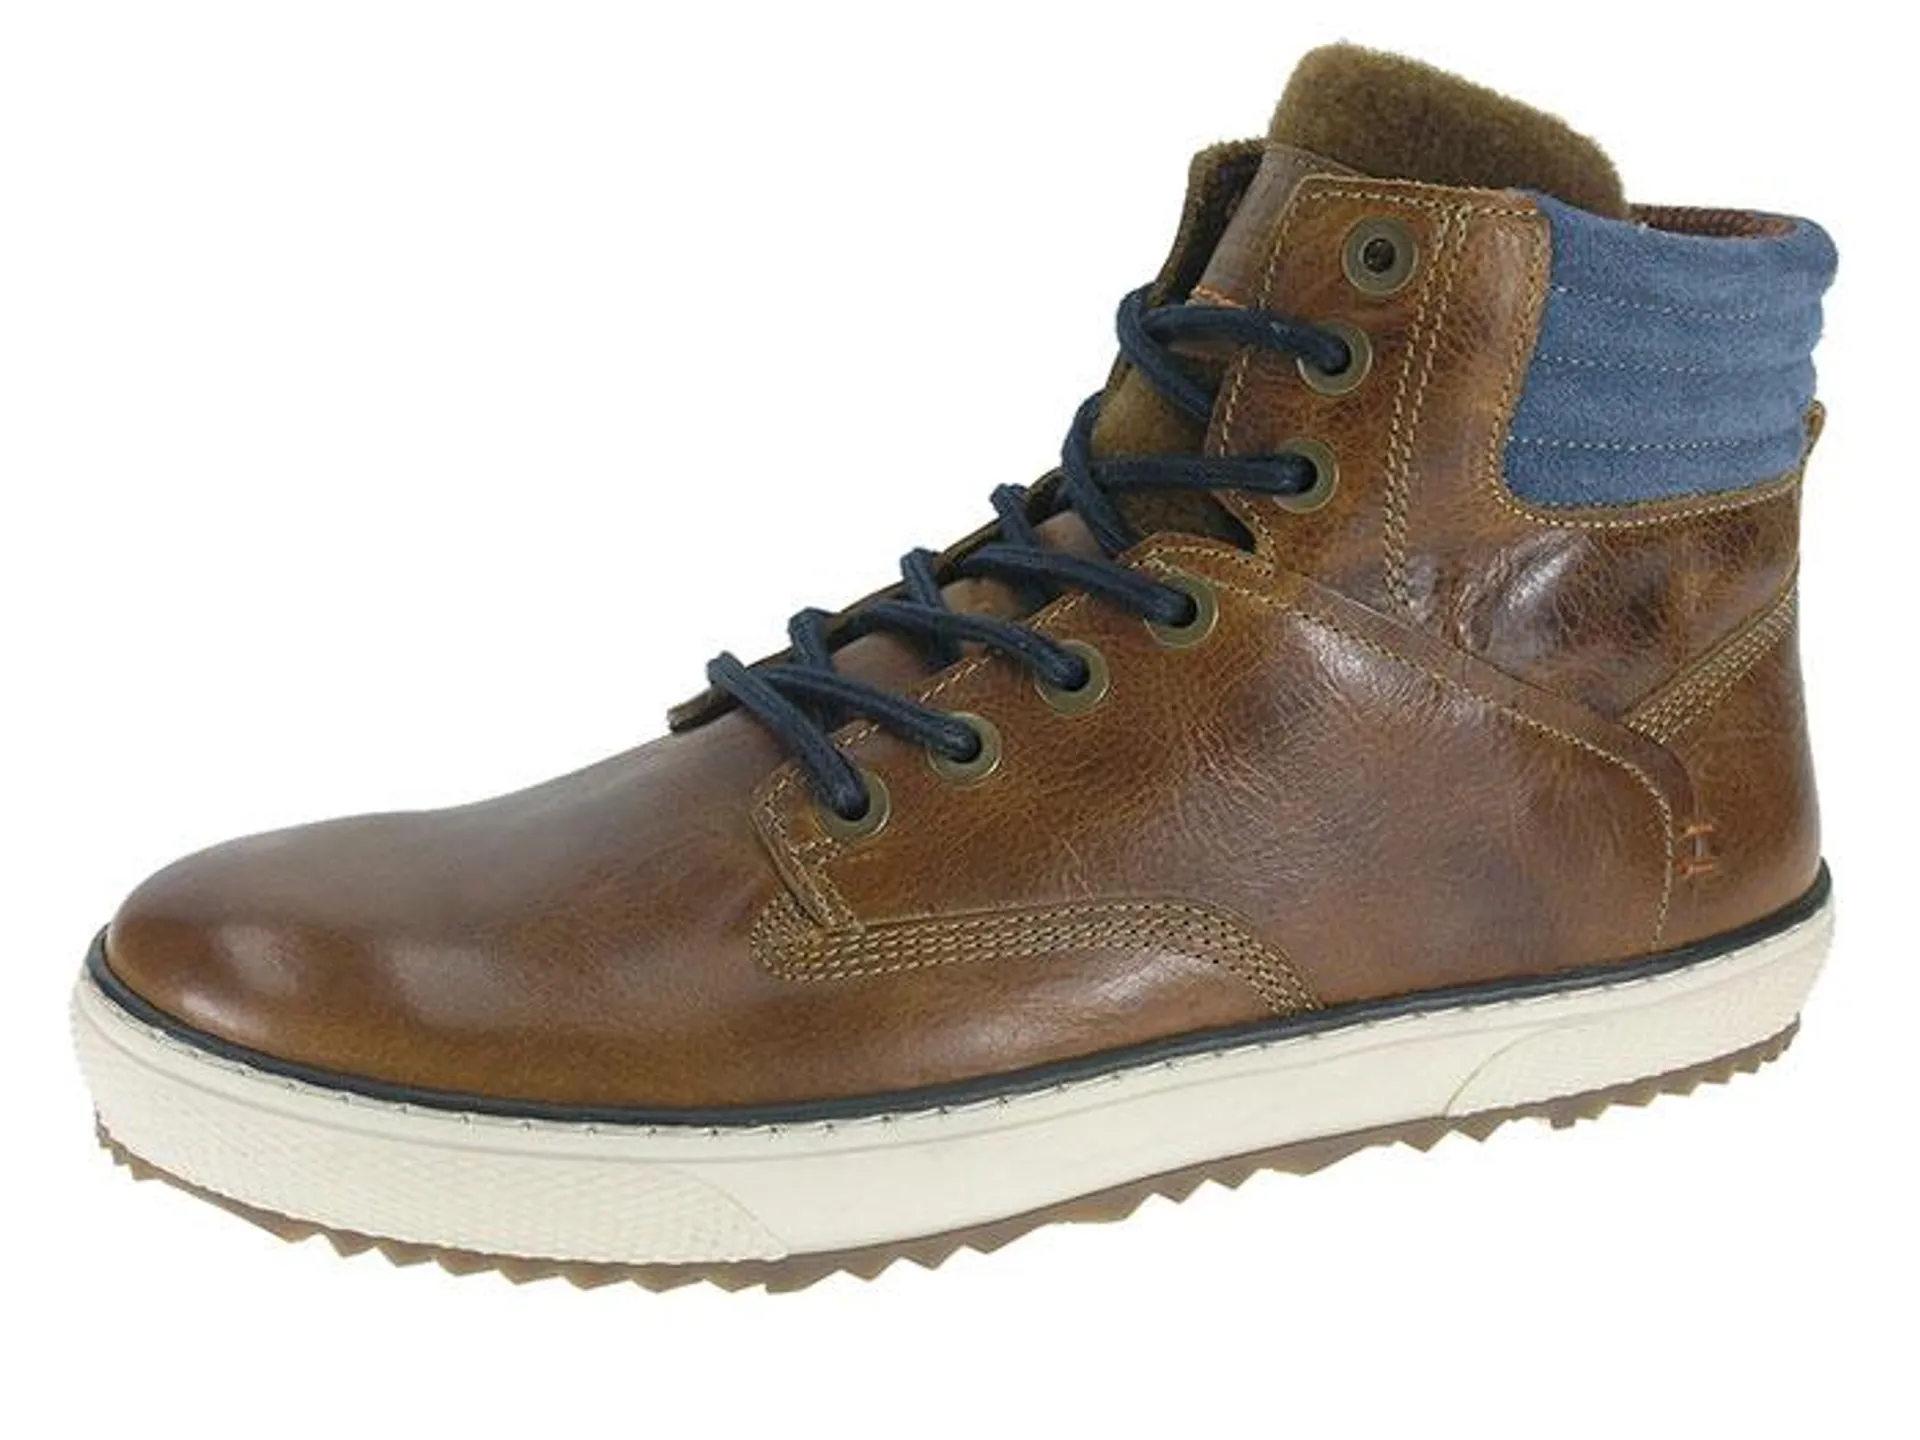 Casual boot for men